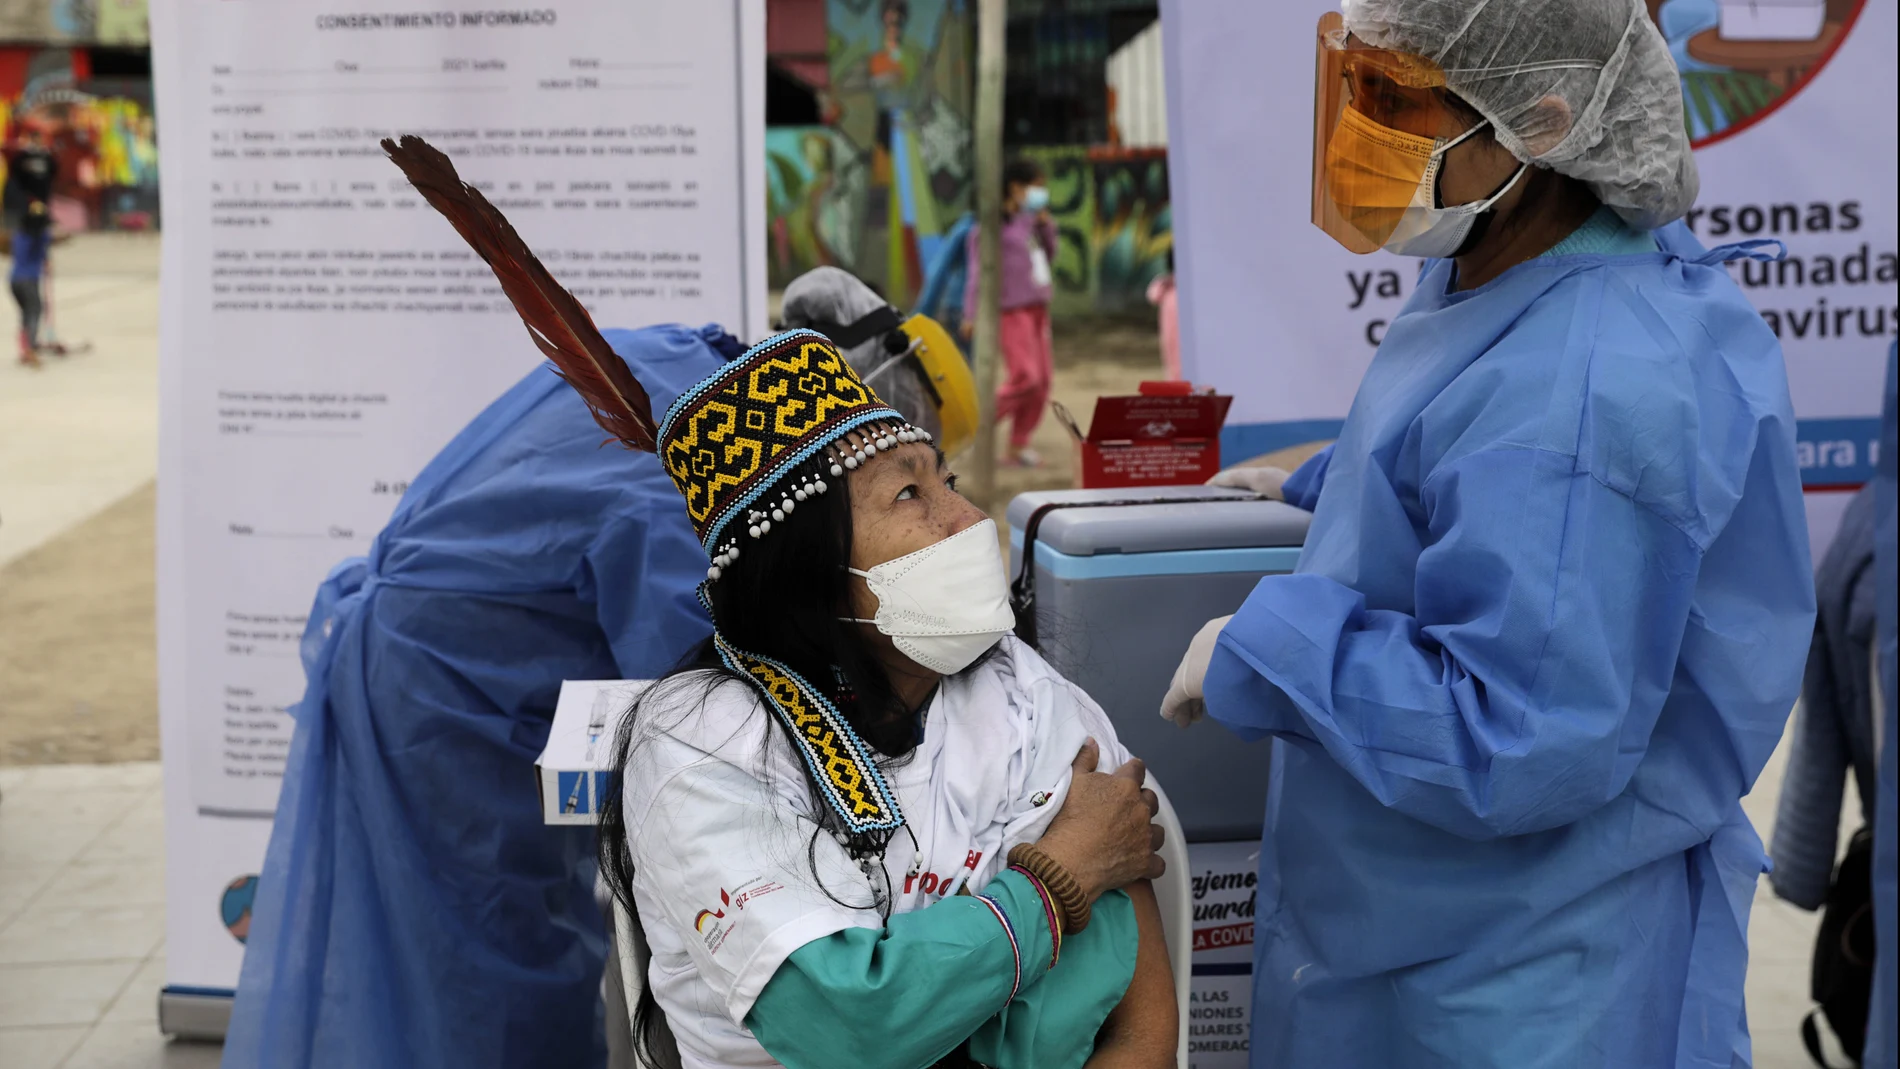 A Shipibo-Konibo Indigenous woman talks to a nurse after receiving the first dose of the Sinopharm COVID-19 vaccine in the Cantagallo neighborhood of Lima, Peru, Monday, Aug. 9, 2021. (AP Photo/Guadalupe Pardo)